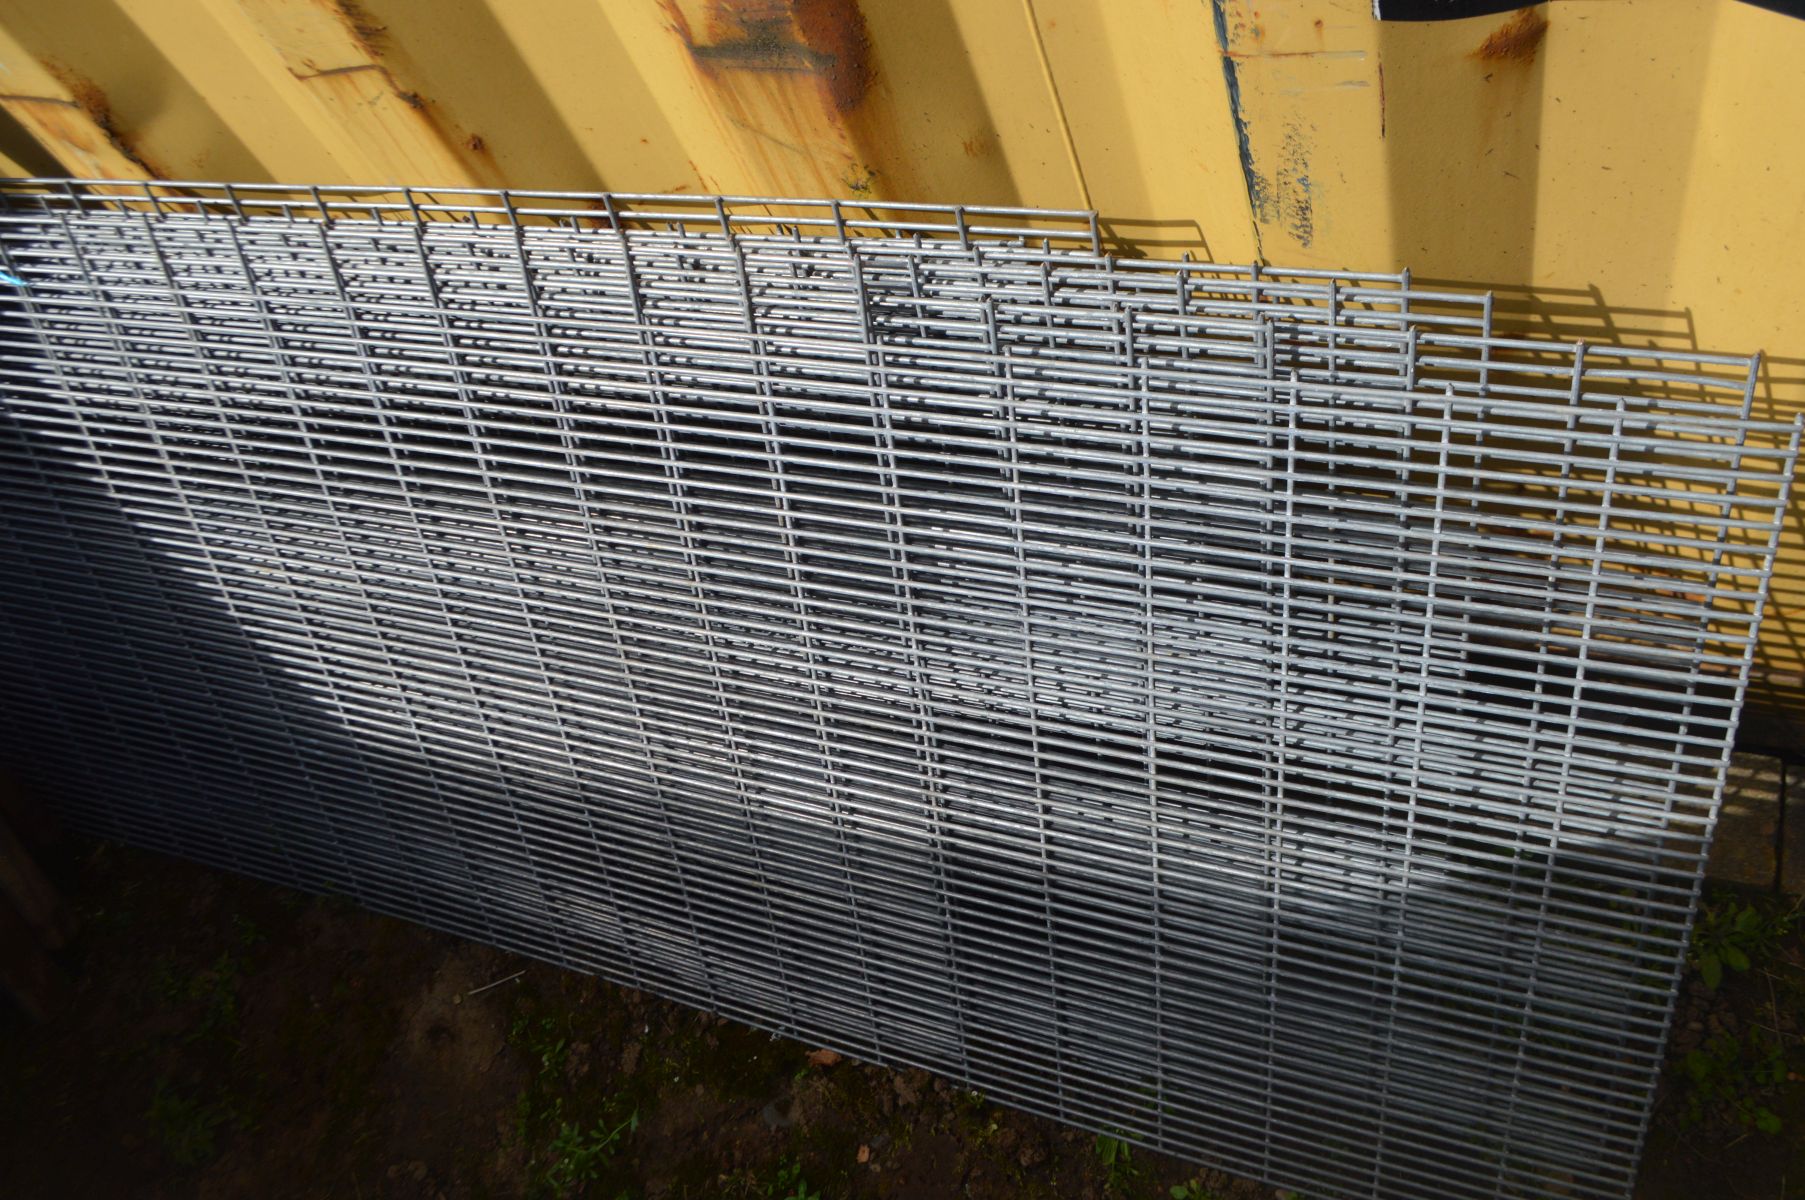 TEN GALVANISED WIRE MESH, 260cm x 67cm (unknown if all the same size)